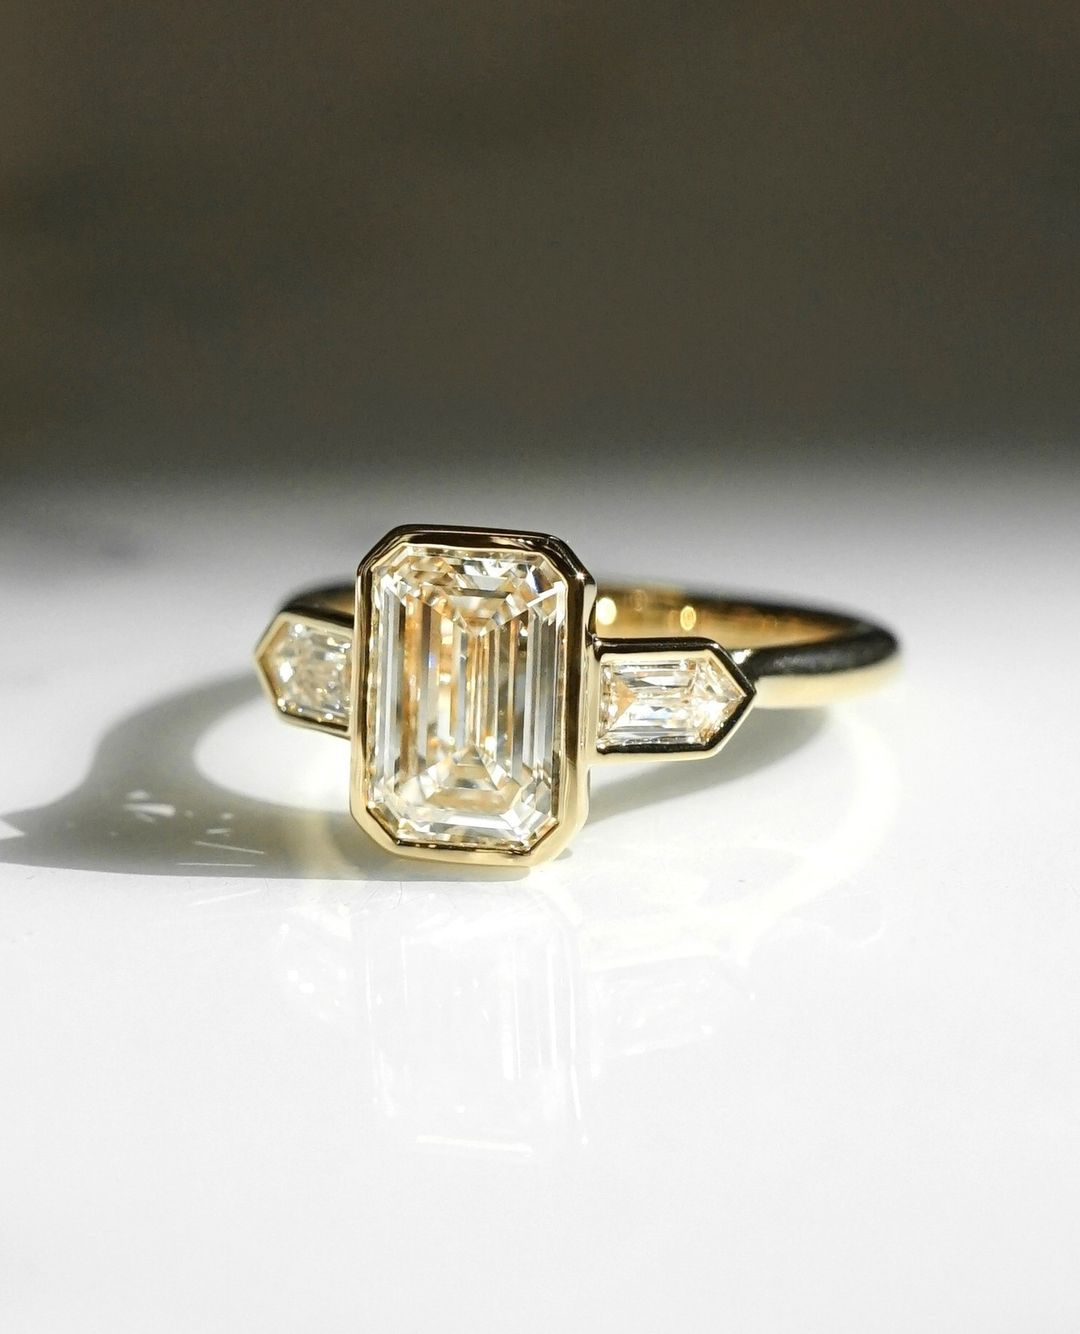 2.8CT White Emerald Cut Bezel And Three Stone Ring | Engagement Promise Ring | Thank You Gift Ring | Bridesmaid Gift